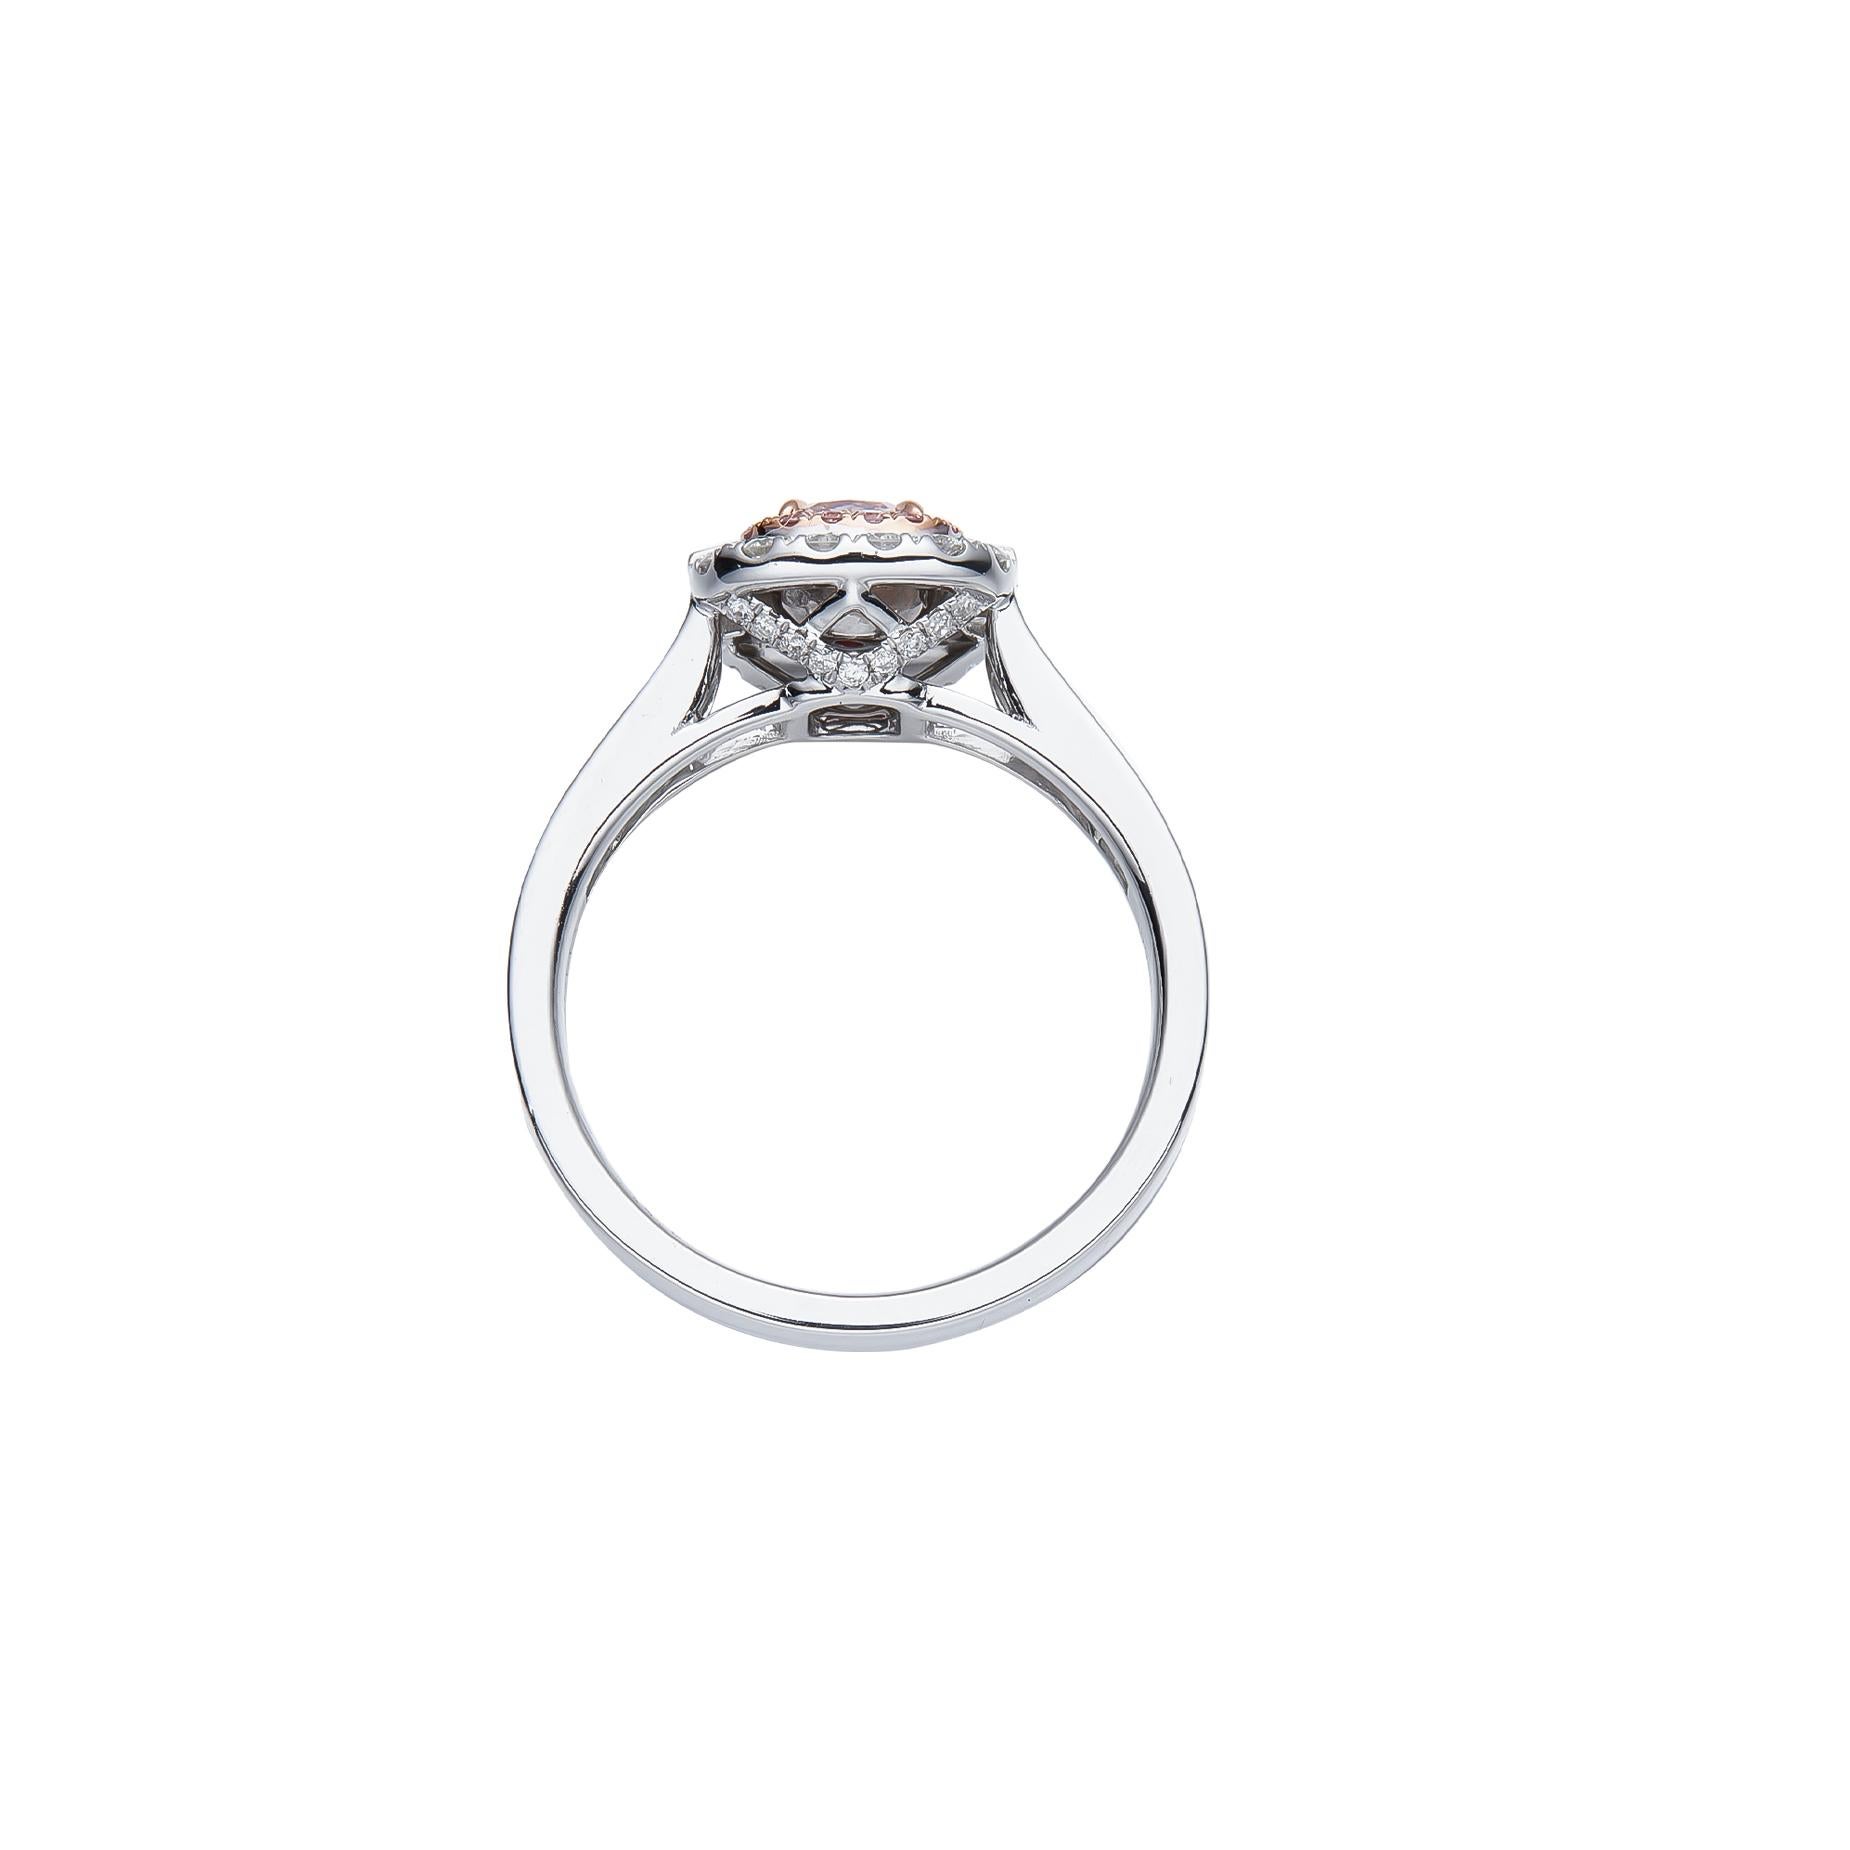 Contemporary GIA Certified, 0.65ct Fancy Light Pink-Brown Natural Cushion Cut Diamond Ring. For Sale